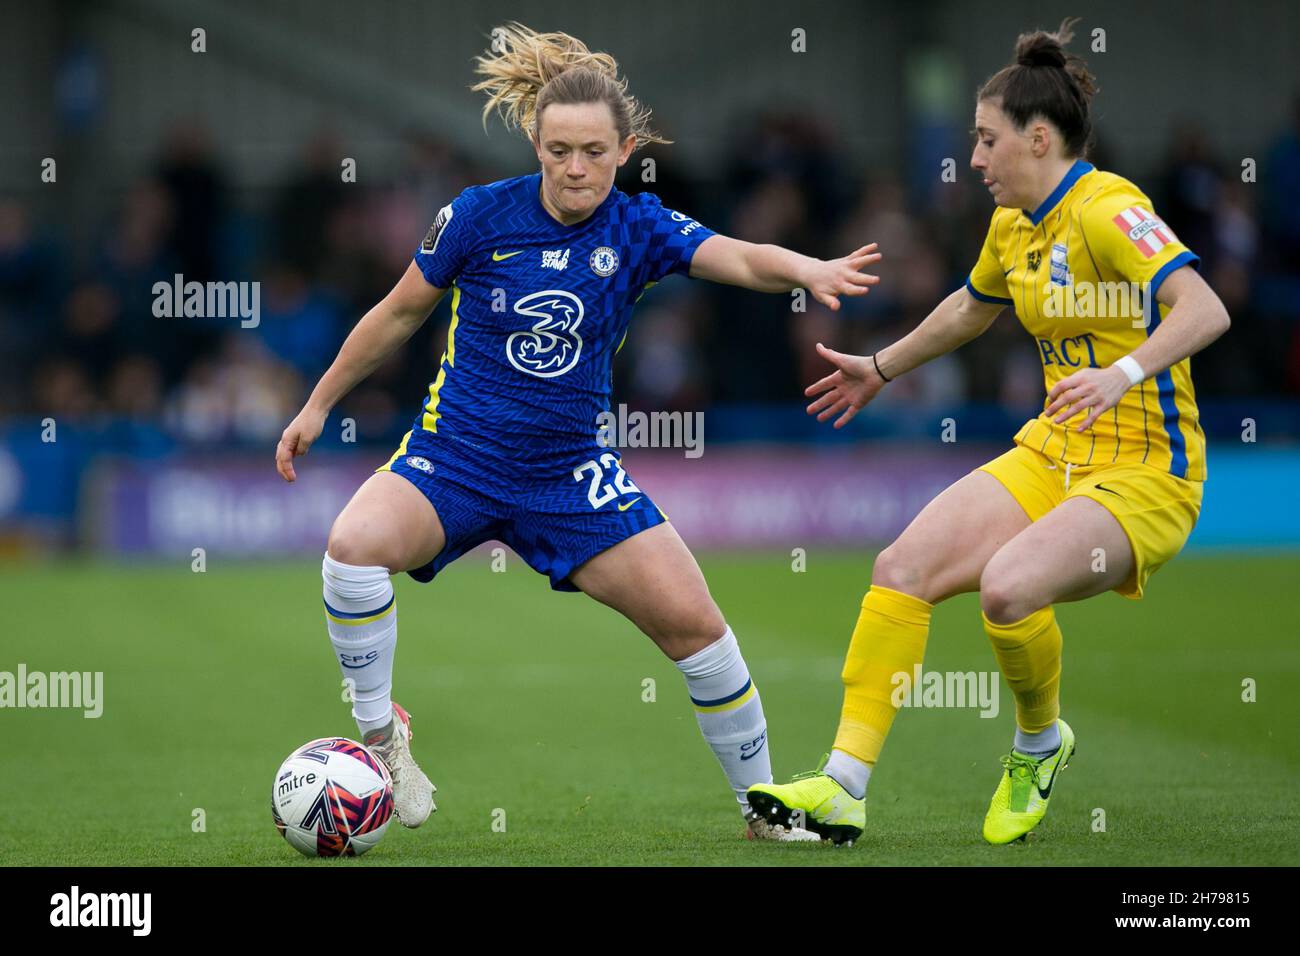 London, UK. 21st Nov, 2021. LONDON, UK. NOVEMBER 21ST : Erin Cuthbert of Chelsea FC controls the ball during the 2021-22 FA Womens Superleague fixture between Chelsea FC and Birmingham City at Kingsmeadow. Credit: Federico Guerra Morán/Alamy Live News Stock Photo